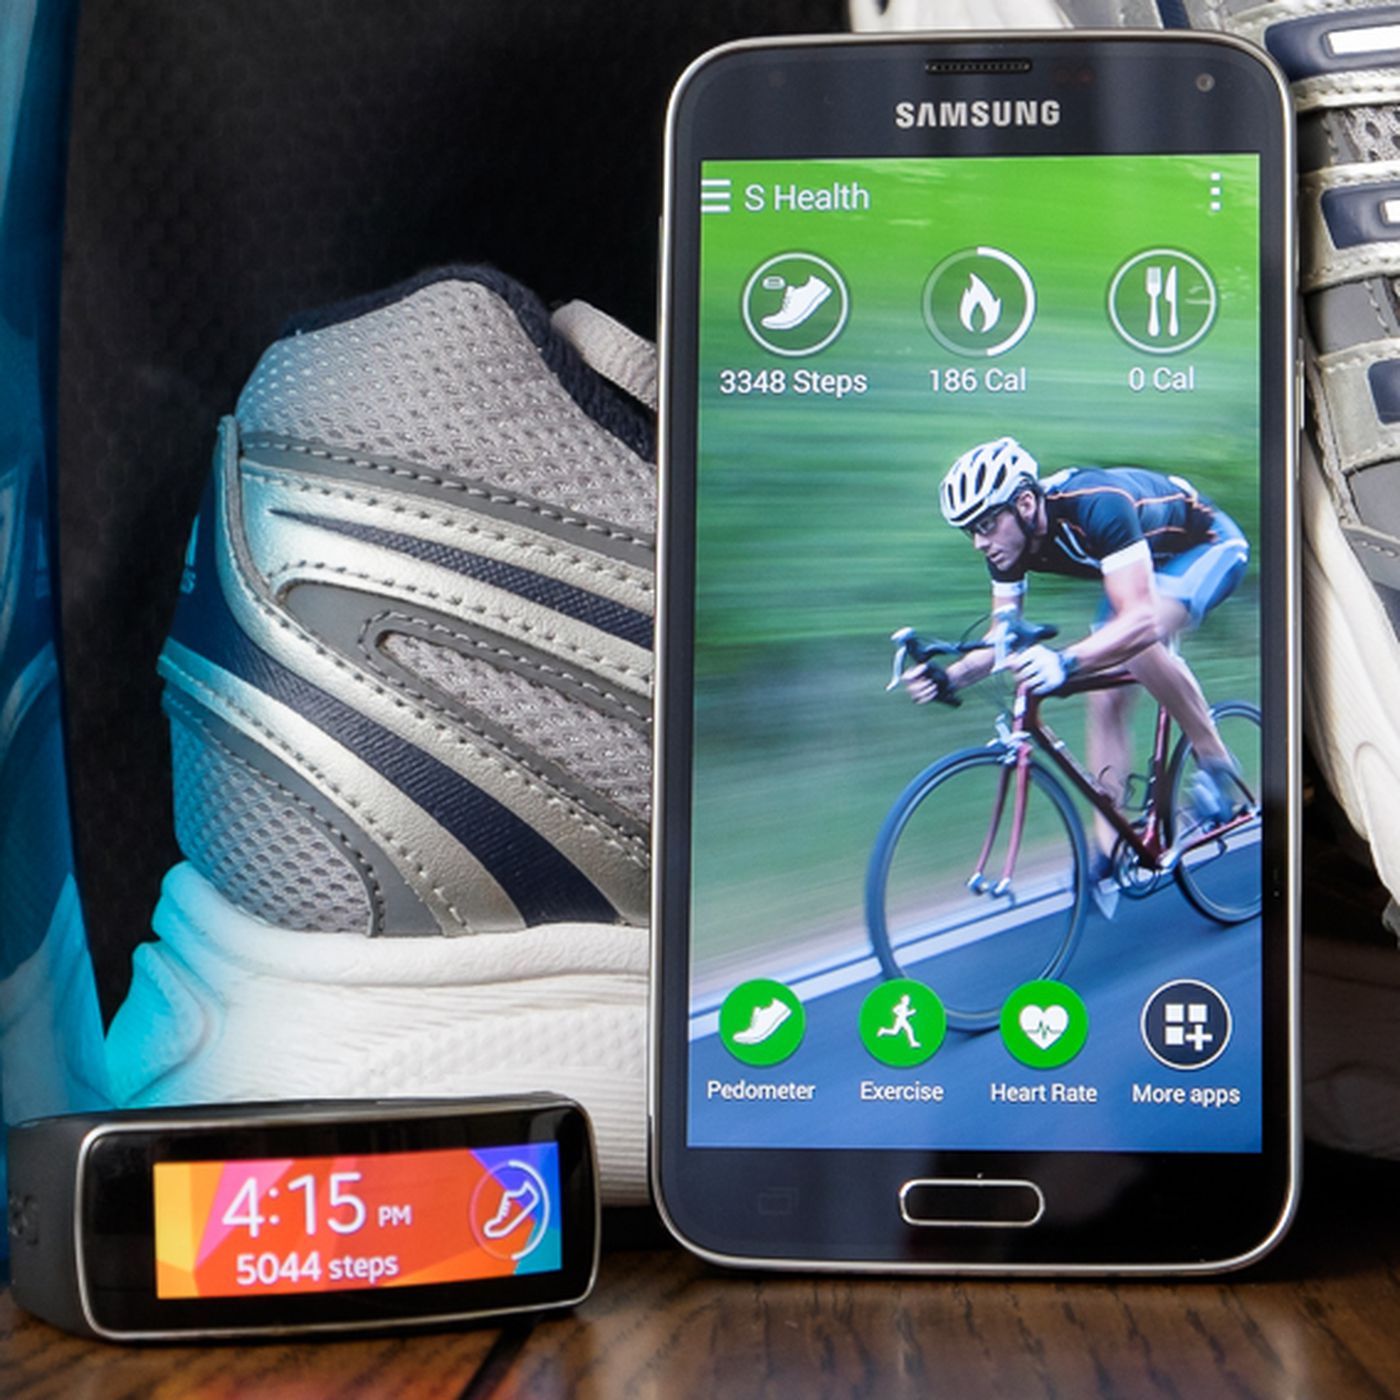 A Samsung smart phone and a step counter placed near a pair of sneakers and a water bottle.